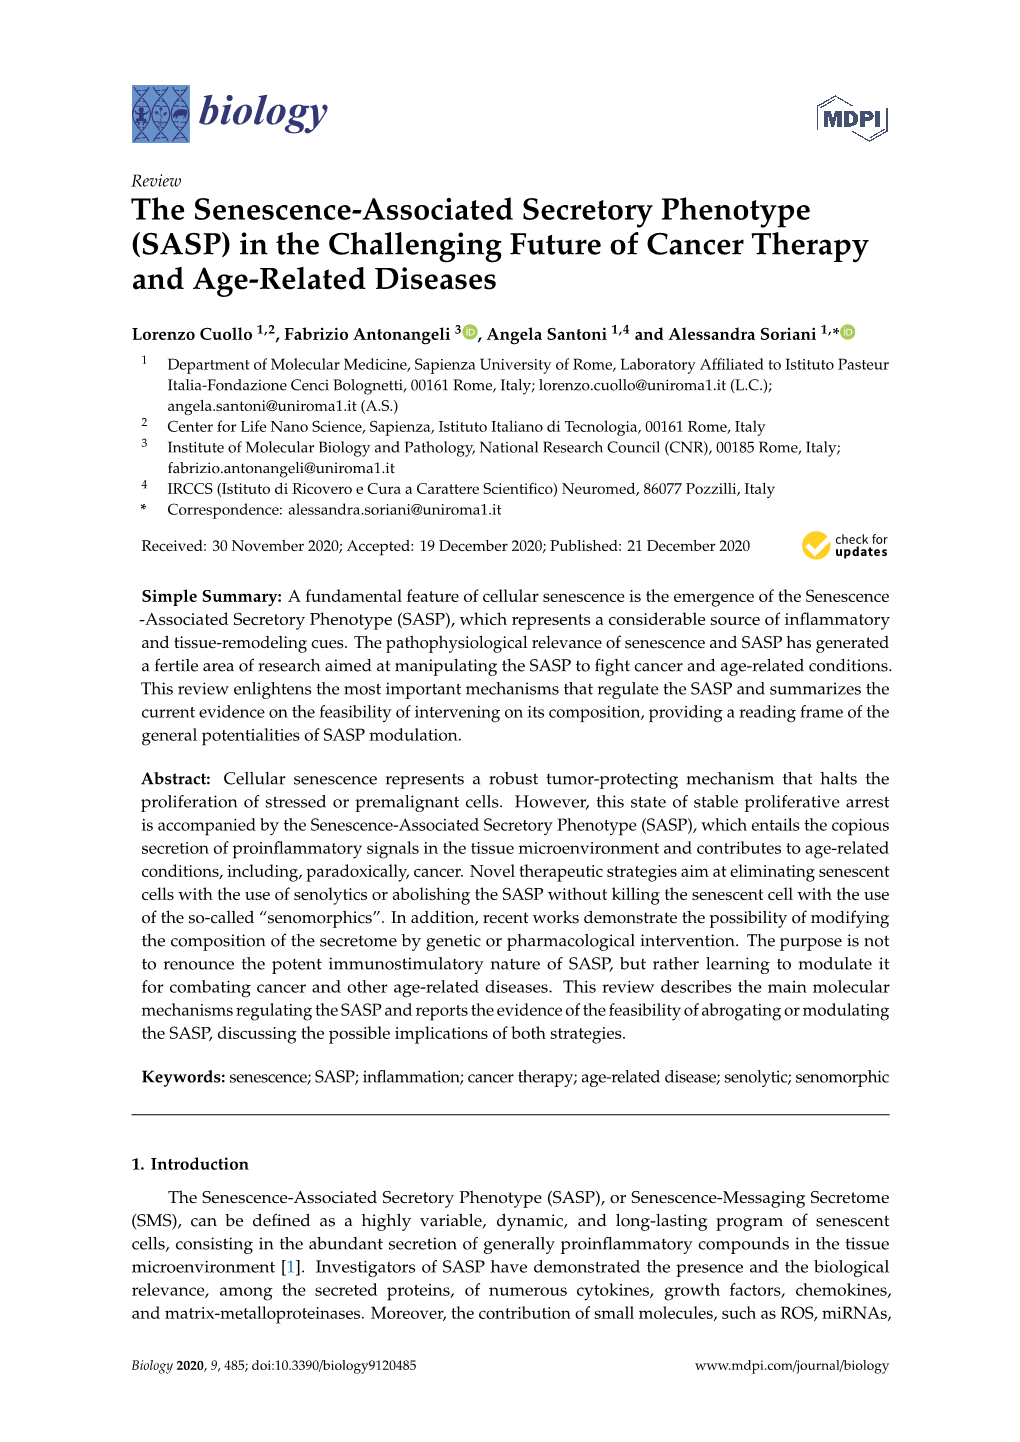 The Senescence-Associated Secretory Phenotype (SASP) in the Challenging Future of Cancer Therapy and Age-Related Diseases